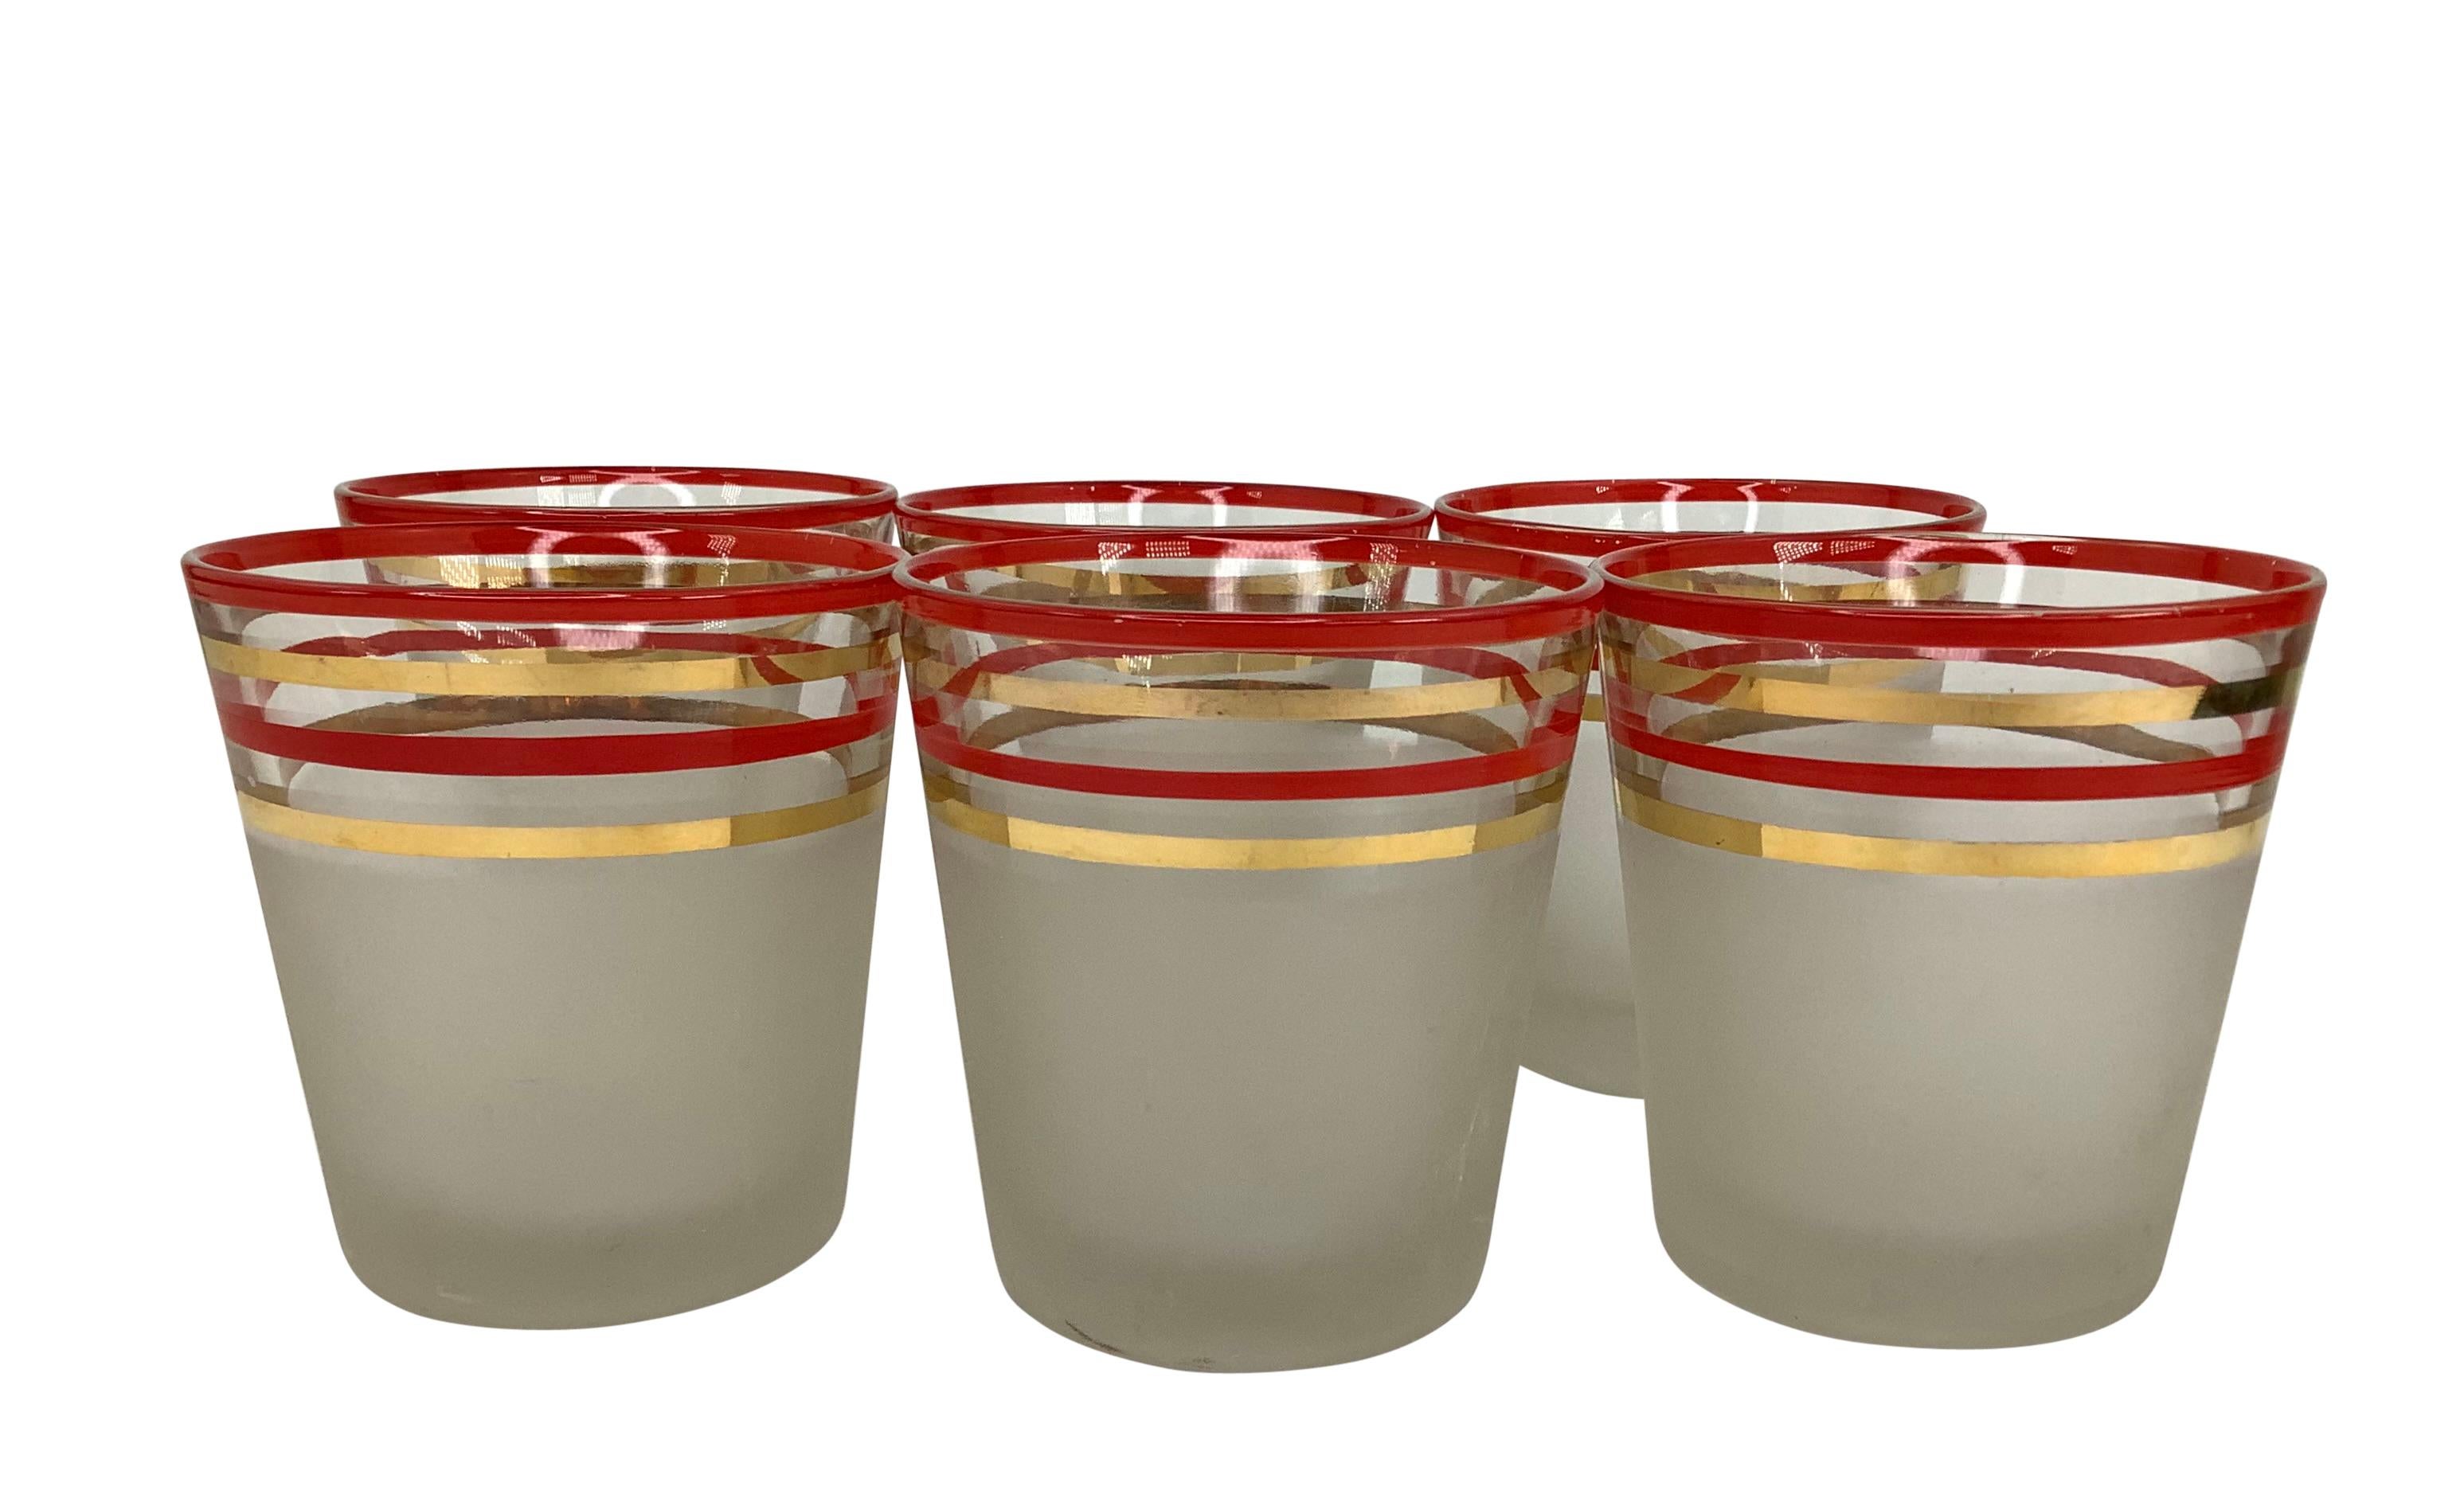 Old Fashioned Rocks Frosted Cocktail Glasses With Red and Gold Bands - Set of 6 For Sale